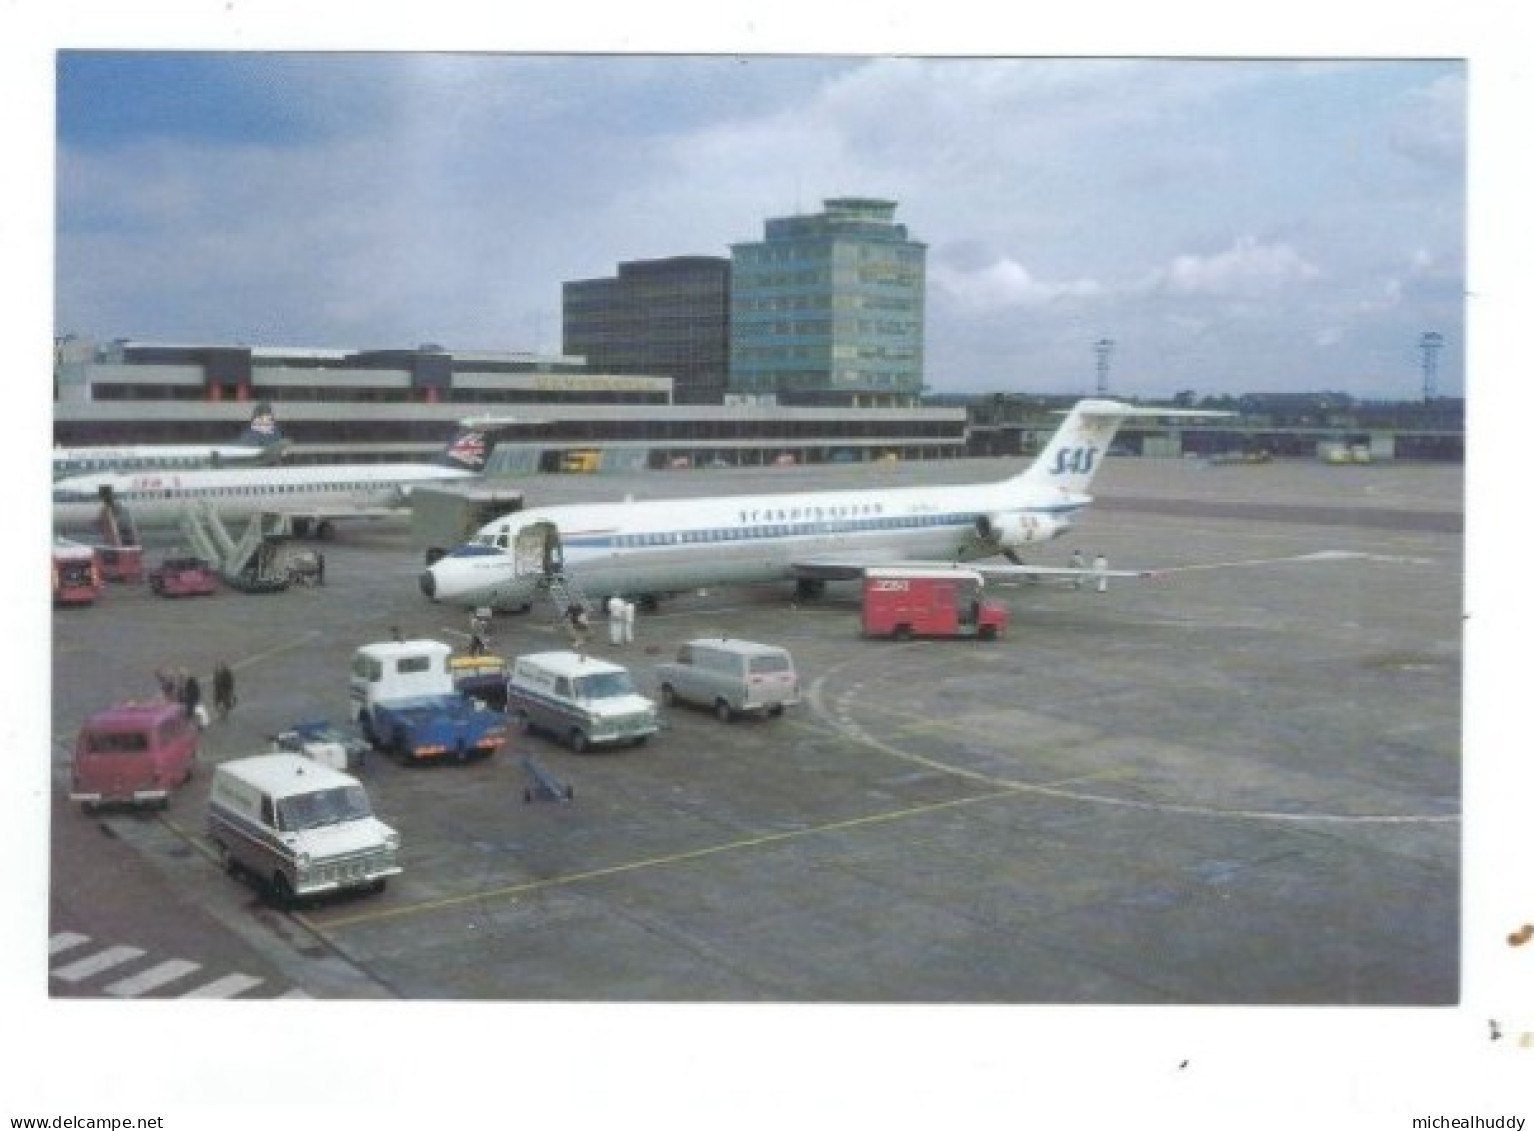 POSTCARD   PUBL BY  BY C MCQUAIDE IN HIS AIRPORT SERIES  MANCHESTER INTERNATIONAL  CARD NO  70 - Aérodromes